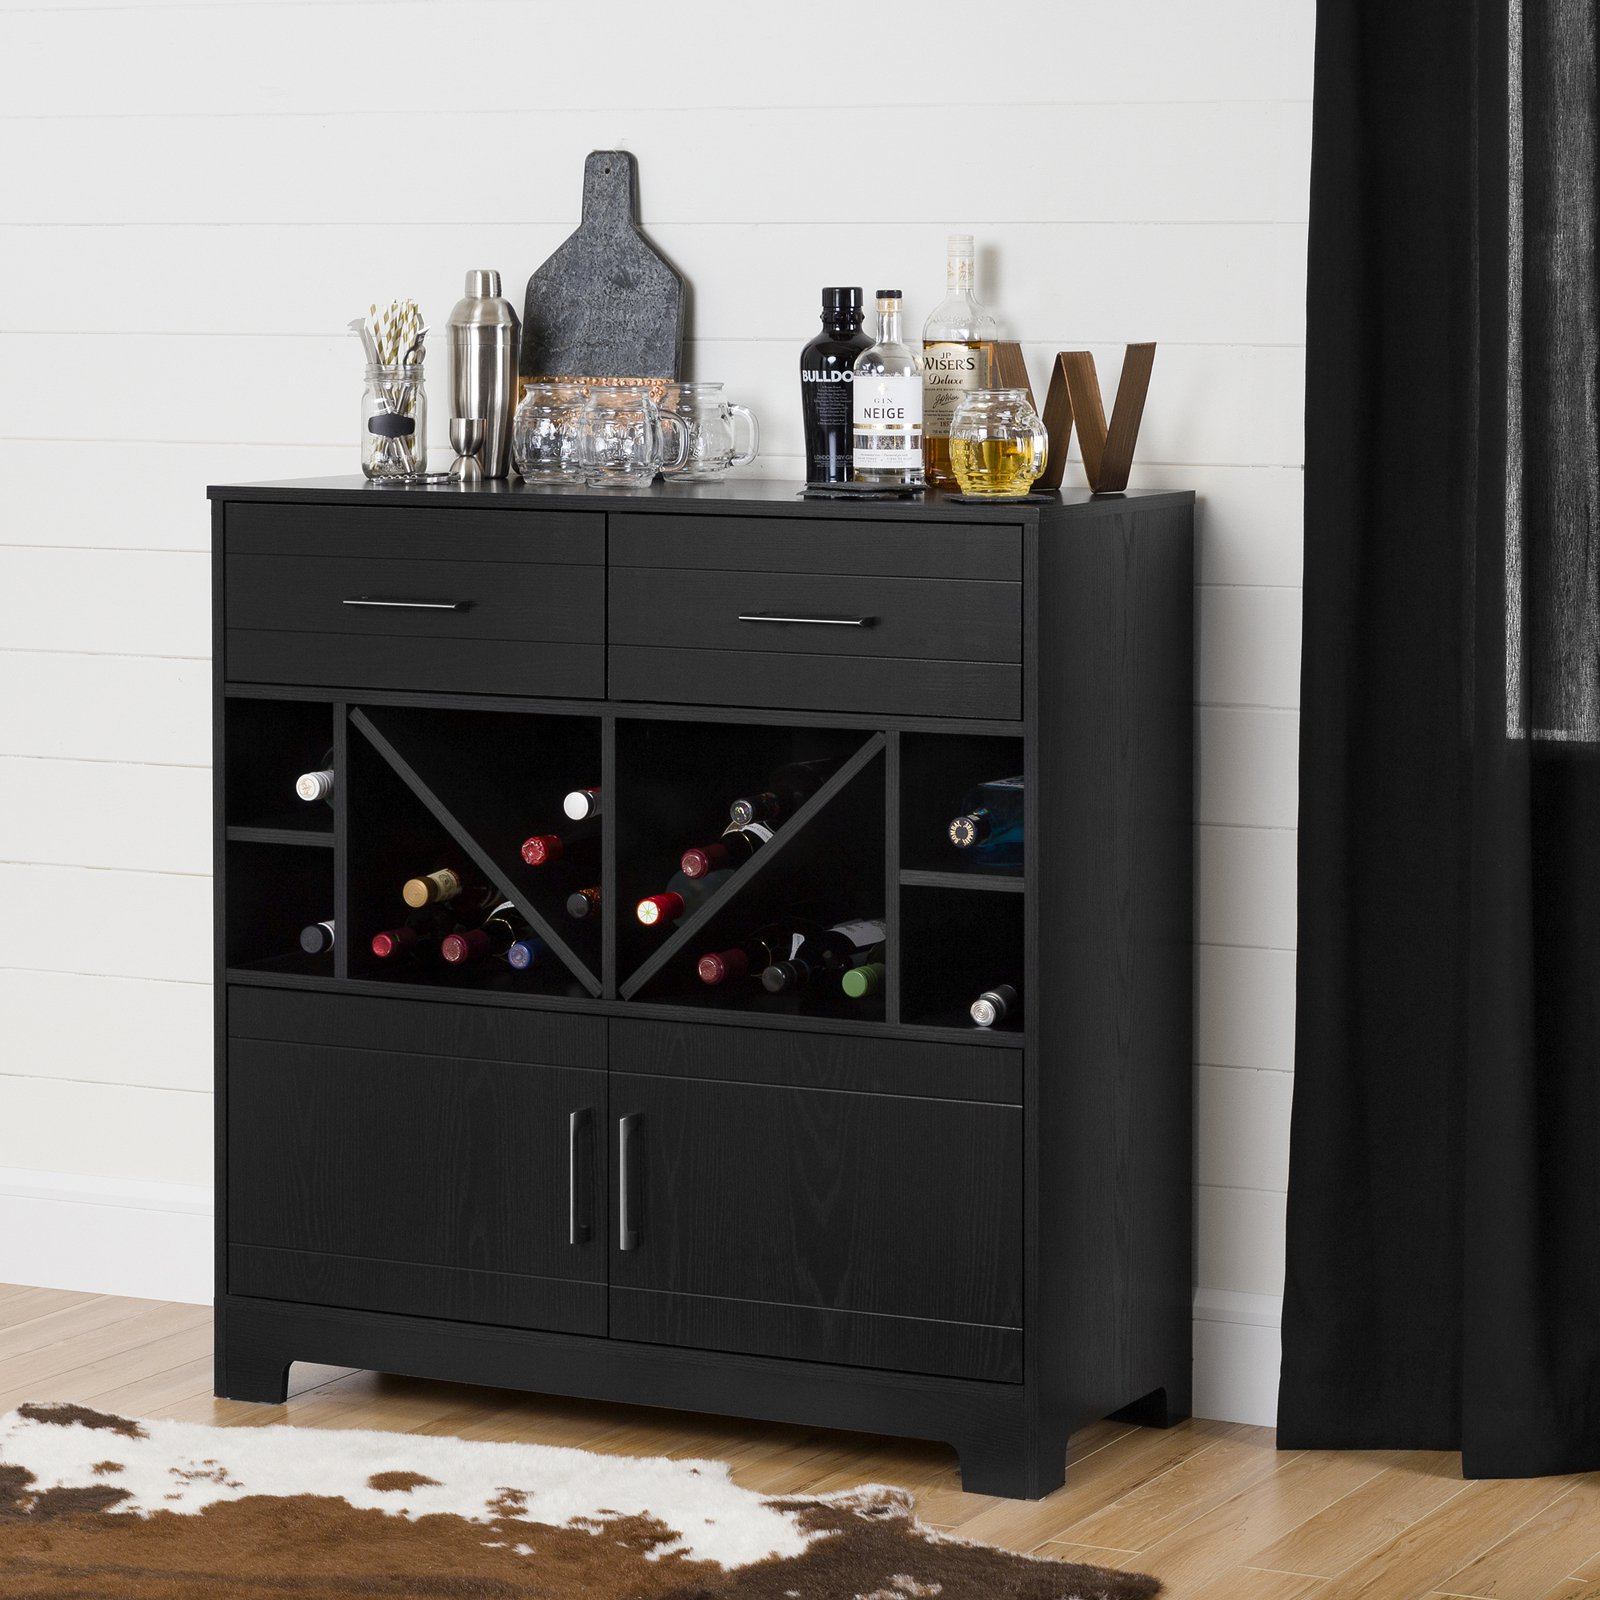 Vietti Bar Cabinet With Bottle Storage And Drawers Multiple Finishes inside size 1600 X 1600